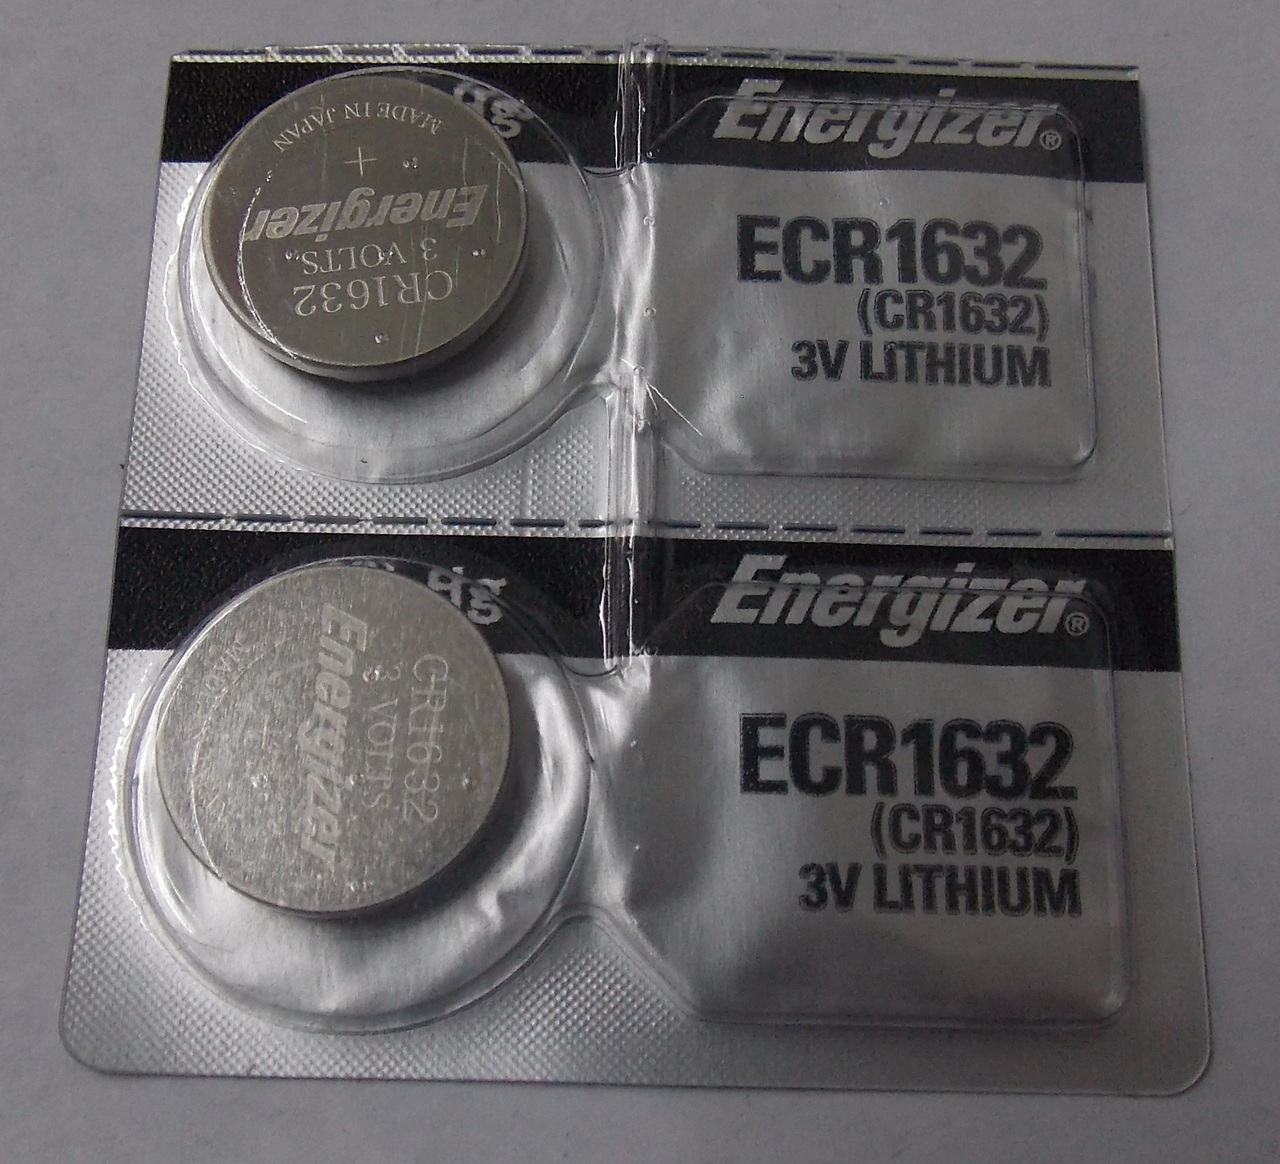 Energizer CR1632 3V Lithium Coin Battery - 2 Pack +  FREE SHIPPING!